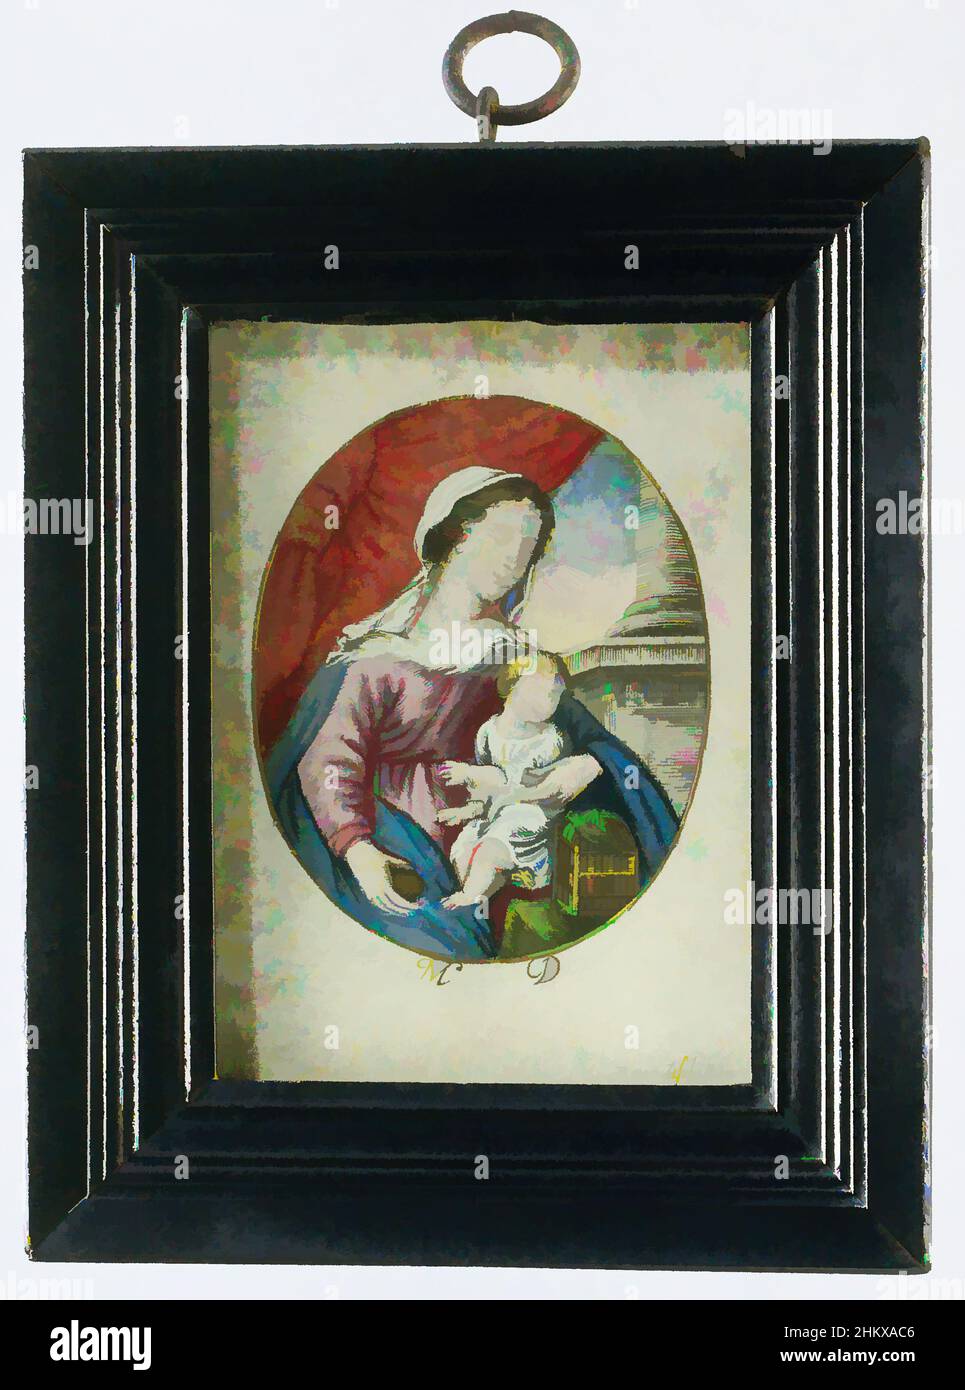 Art inspired by Print depicting Mary with child, Print, oval engraving on parchment, colored with gouache and gold paint, depicting Mary with child seated at a table with birdcage. A red curtain in the background on the left, column bases on the right. Enclosed behind glass in a simple, Classic works modernized by Artotop with a splash of modernity. Shapes, color and value, eye-catching visual impact on art. Emotions through freedom of artworks in a contemporary way. A timeless message pursuing a wildly creative new direction. Artists turning to the digital medium and creating the Artotop NFT Stock Photo